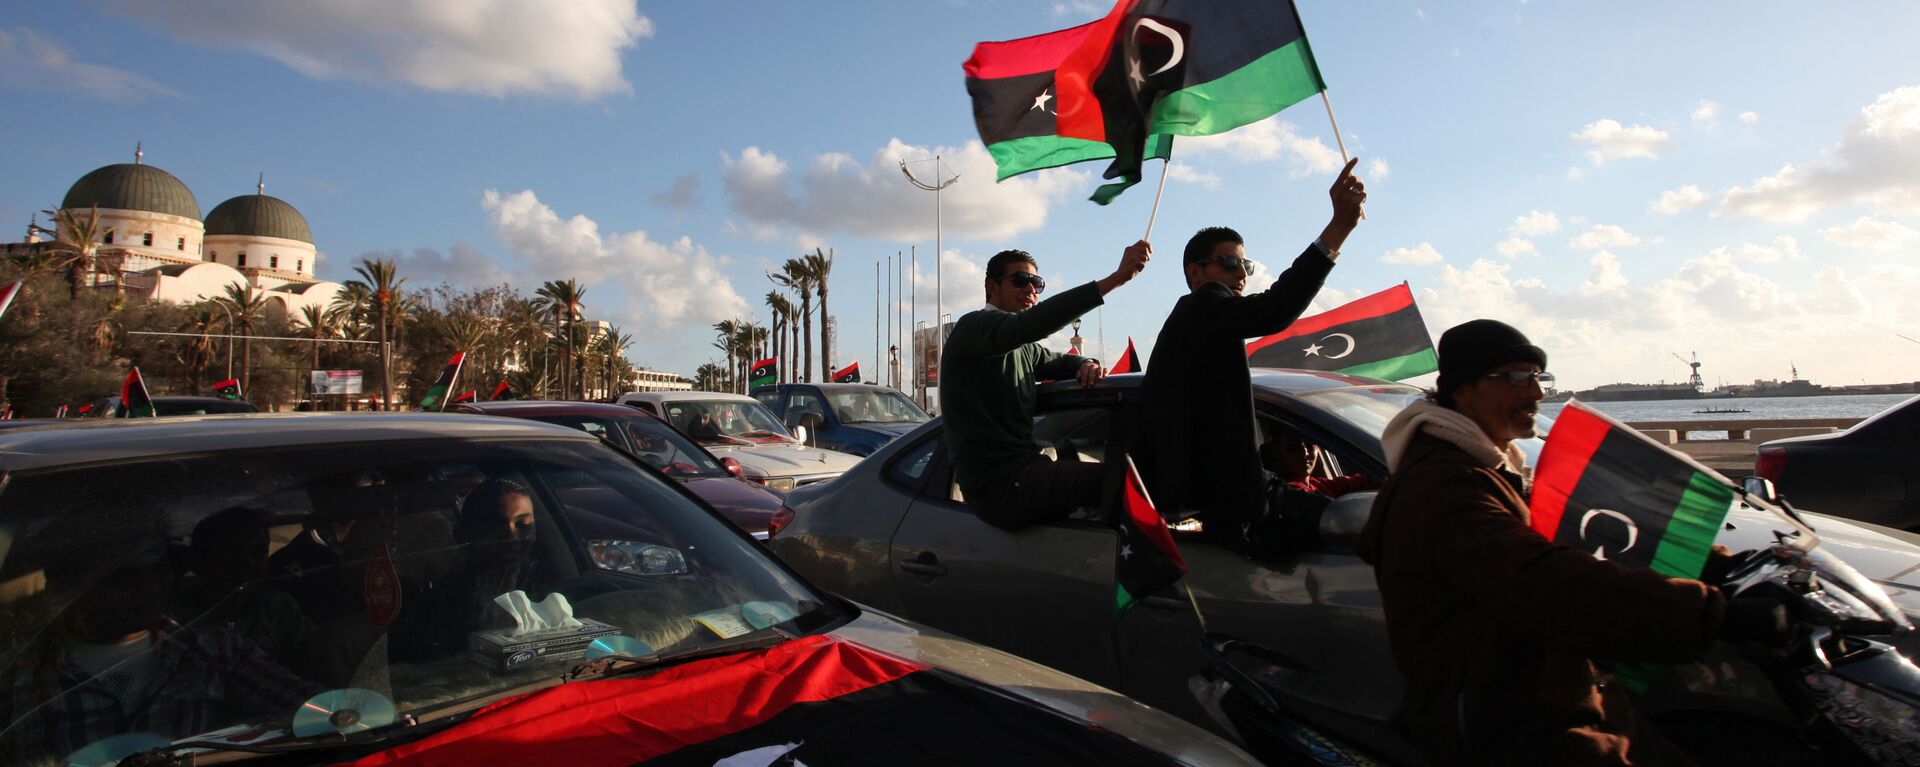 Libyans wave the national flag during commemorations to mark the second anniversary of the revolution that ousted Moammar Gadhafi in Benghazi, Libya, Friday, Feb, 15, 2013 - Sputnik International, 1920, 21.12.2021